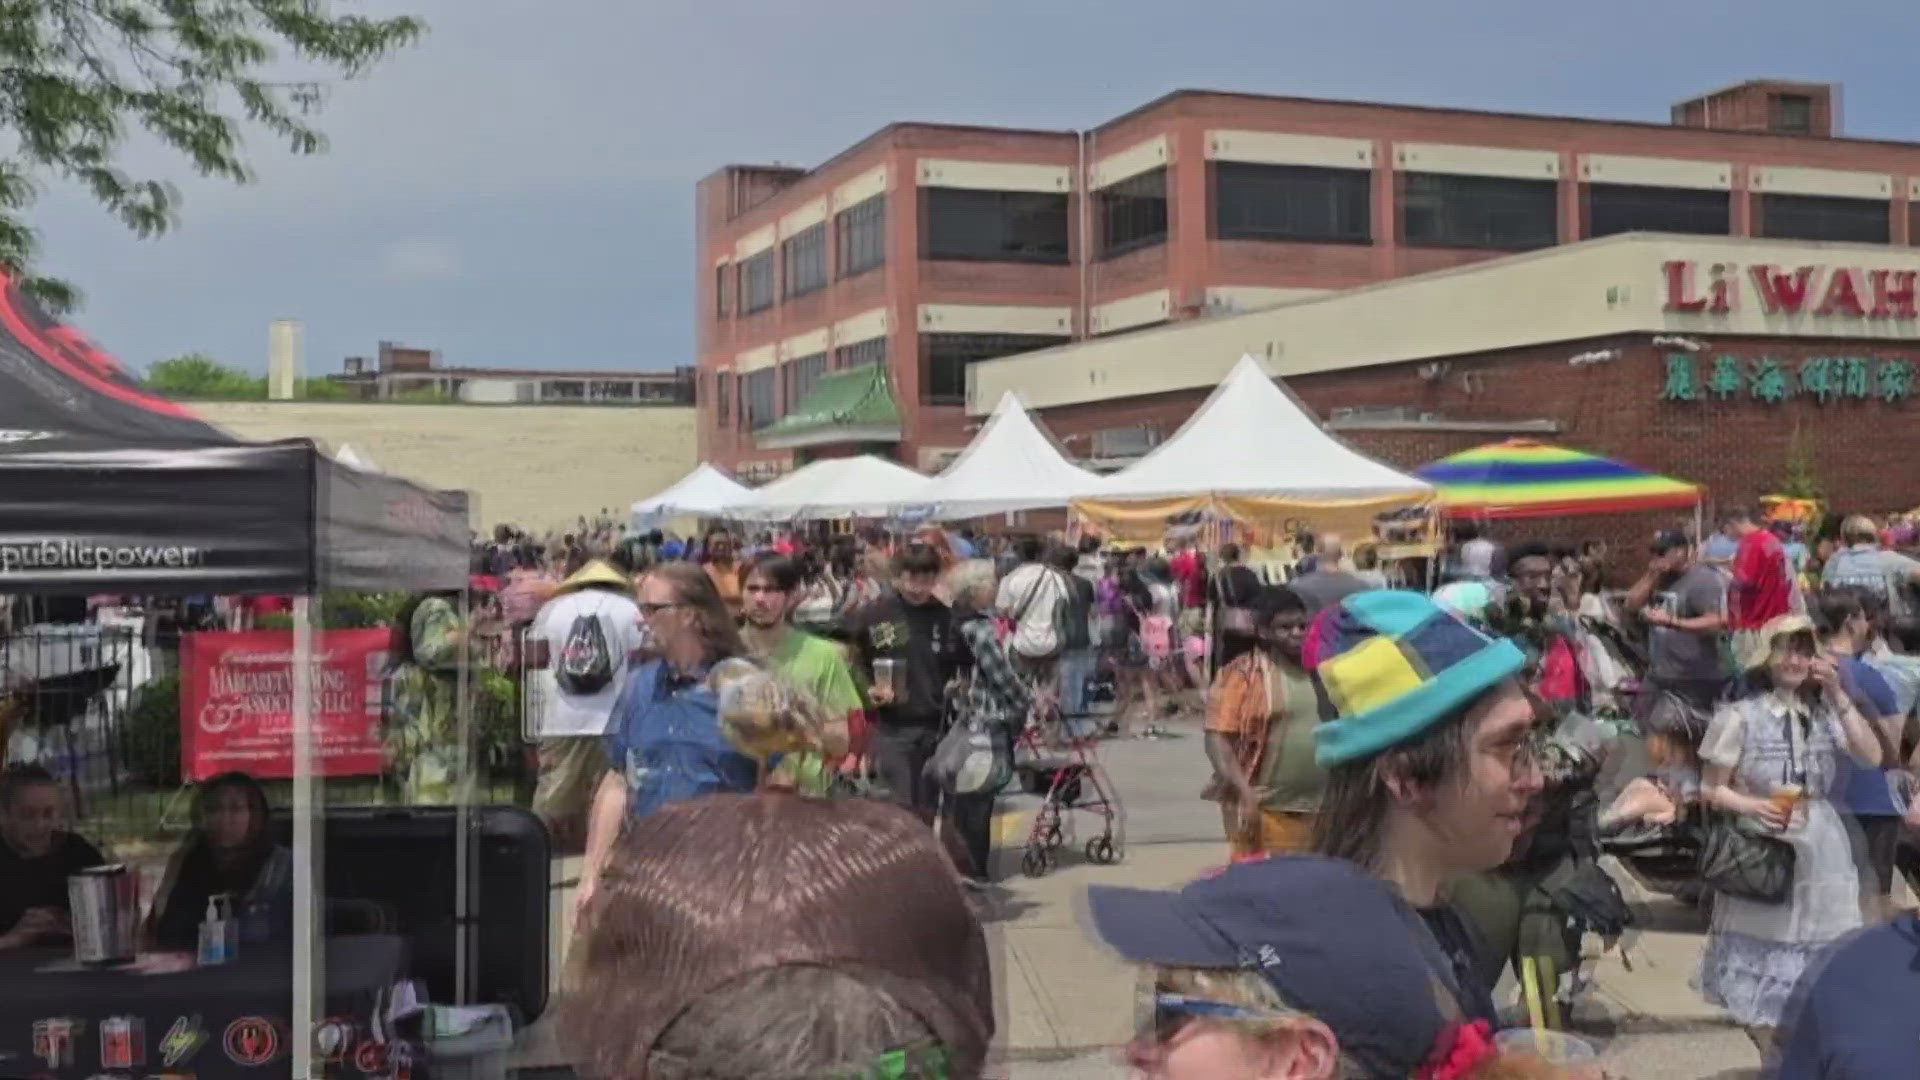 An estimated 50,000 people flocked to Cleveland's AsiaTown neighborhood this weekend for the Cleveland Asian Festival.